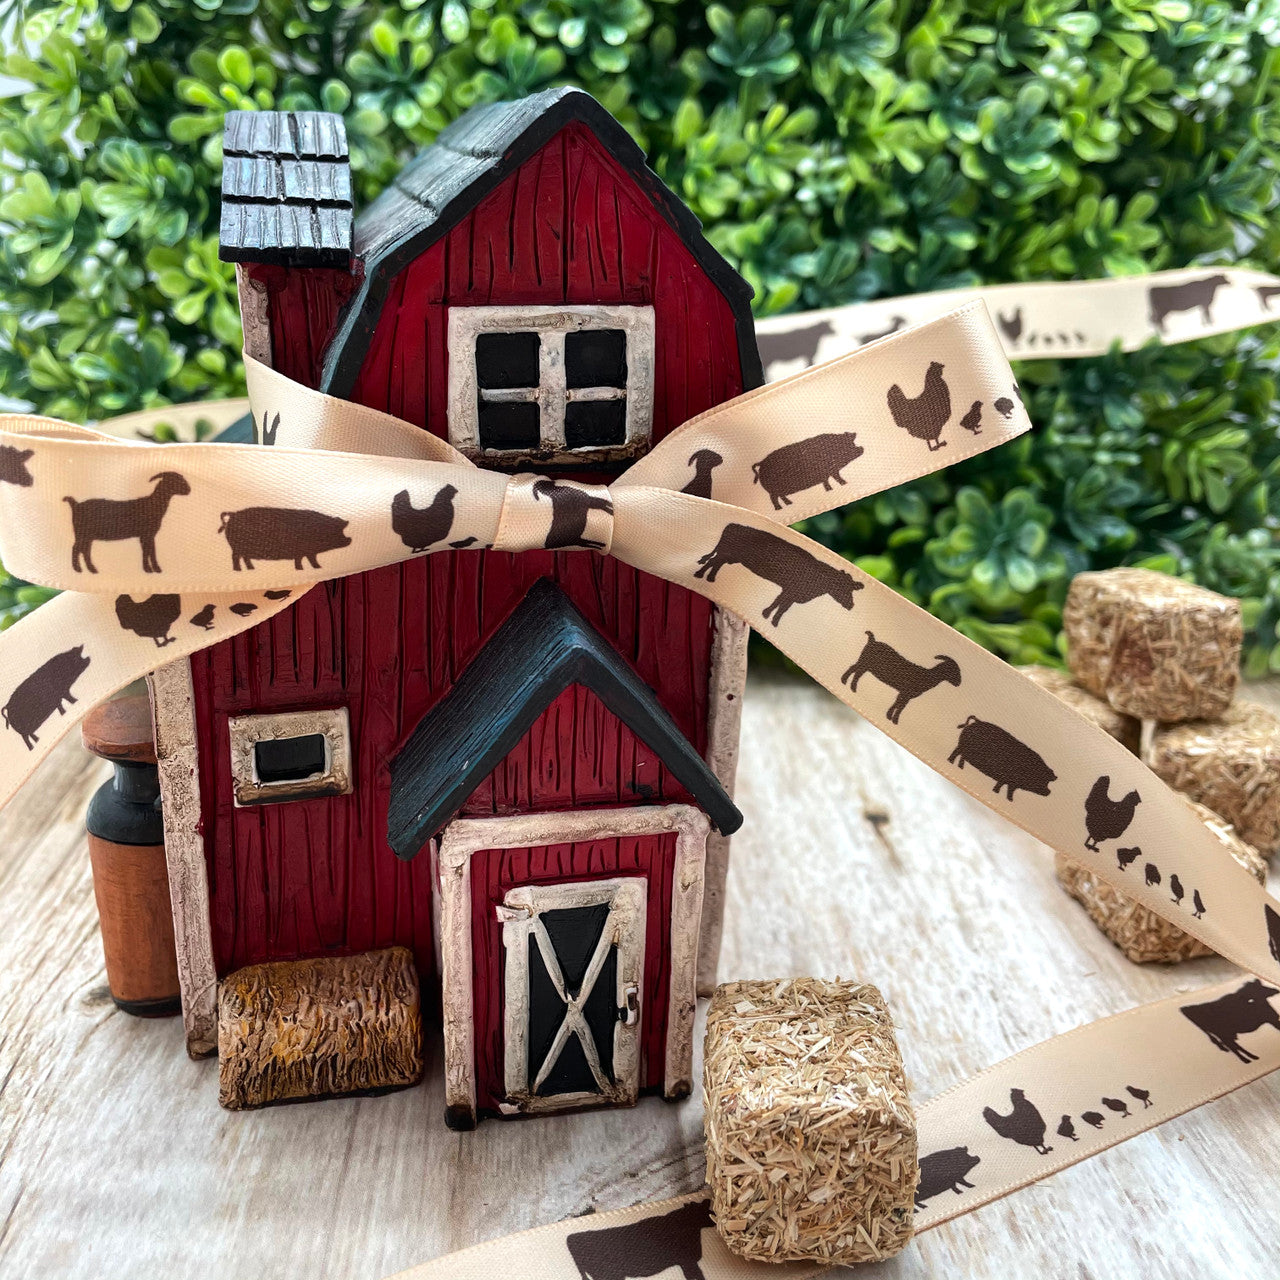 Barn yard animals in a barn yard setting are perfect for  your farm house themed wedding!